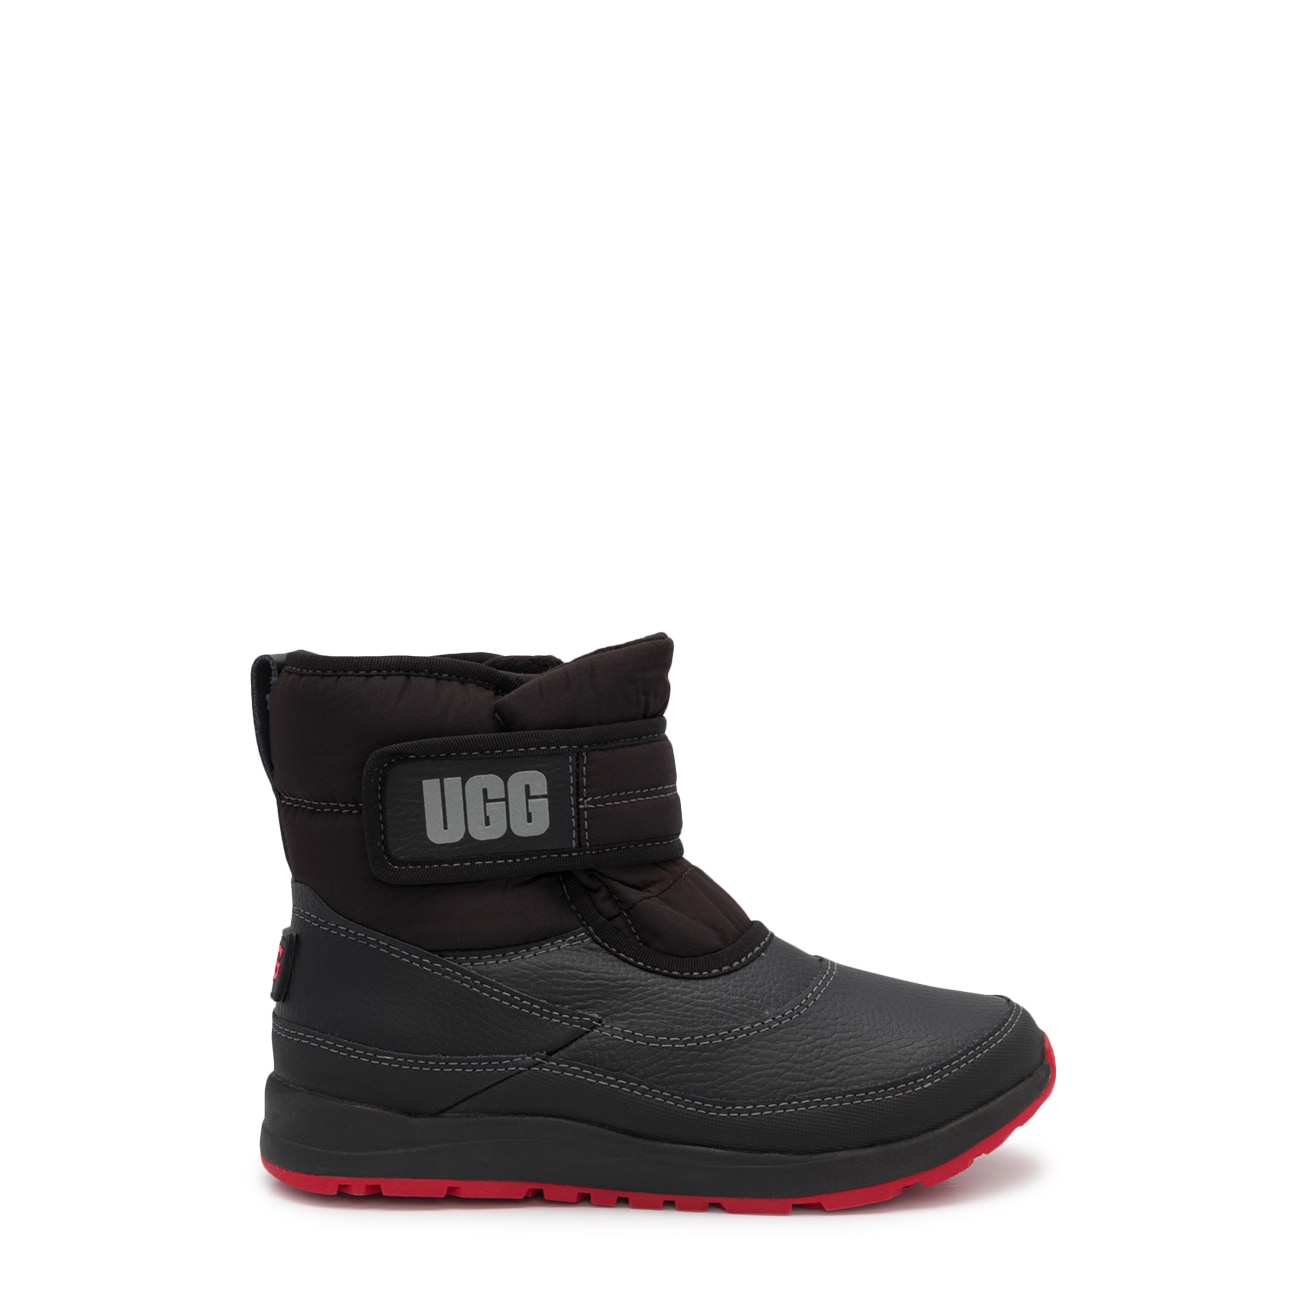 UGG Youth Boys' Taney Weather Waterproof Winter Boot